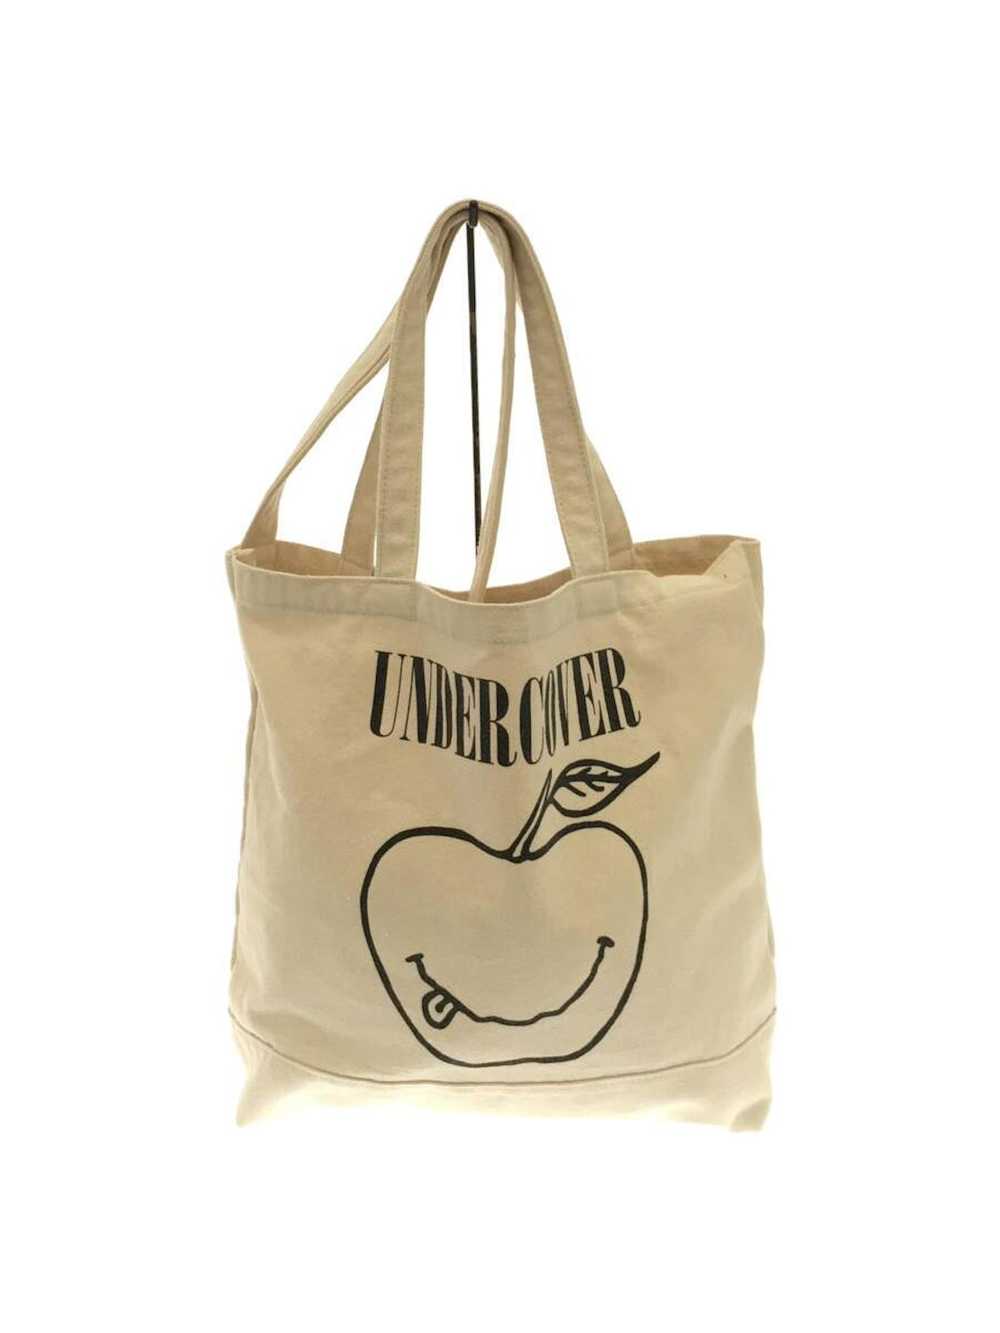 Undercover Smiley Apple Tote Bag - image 1